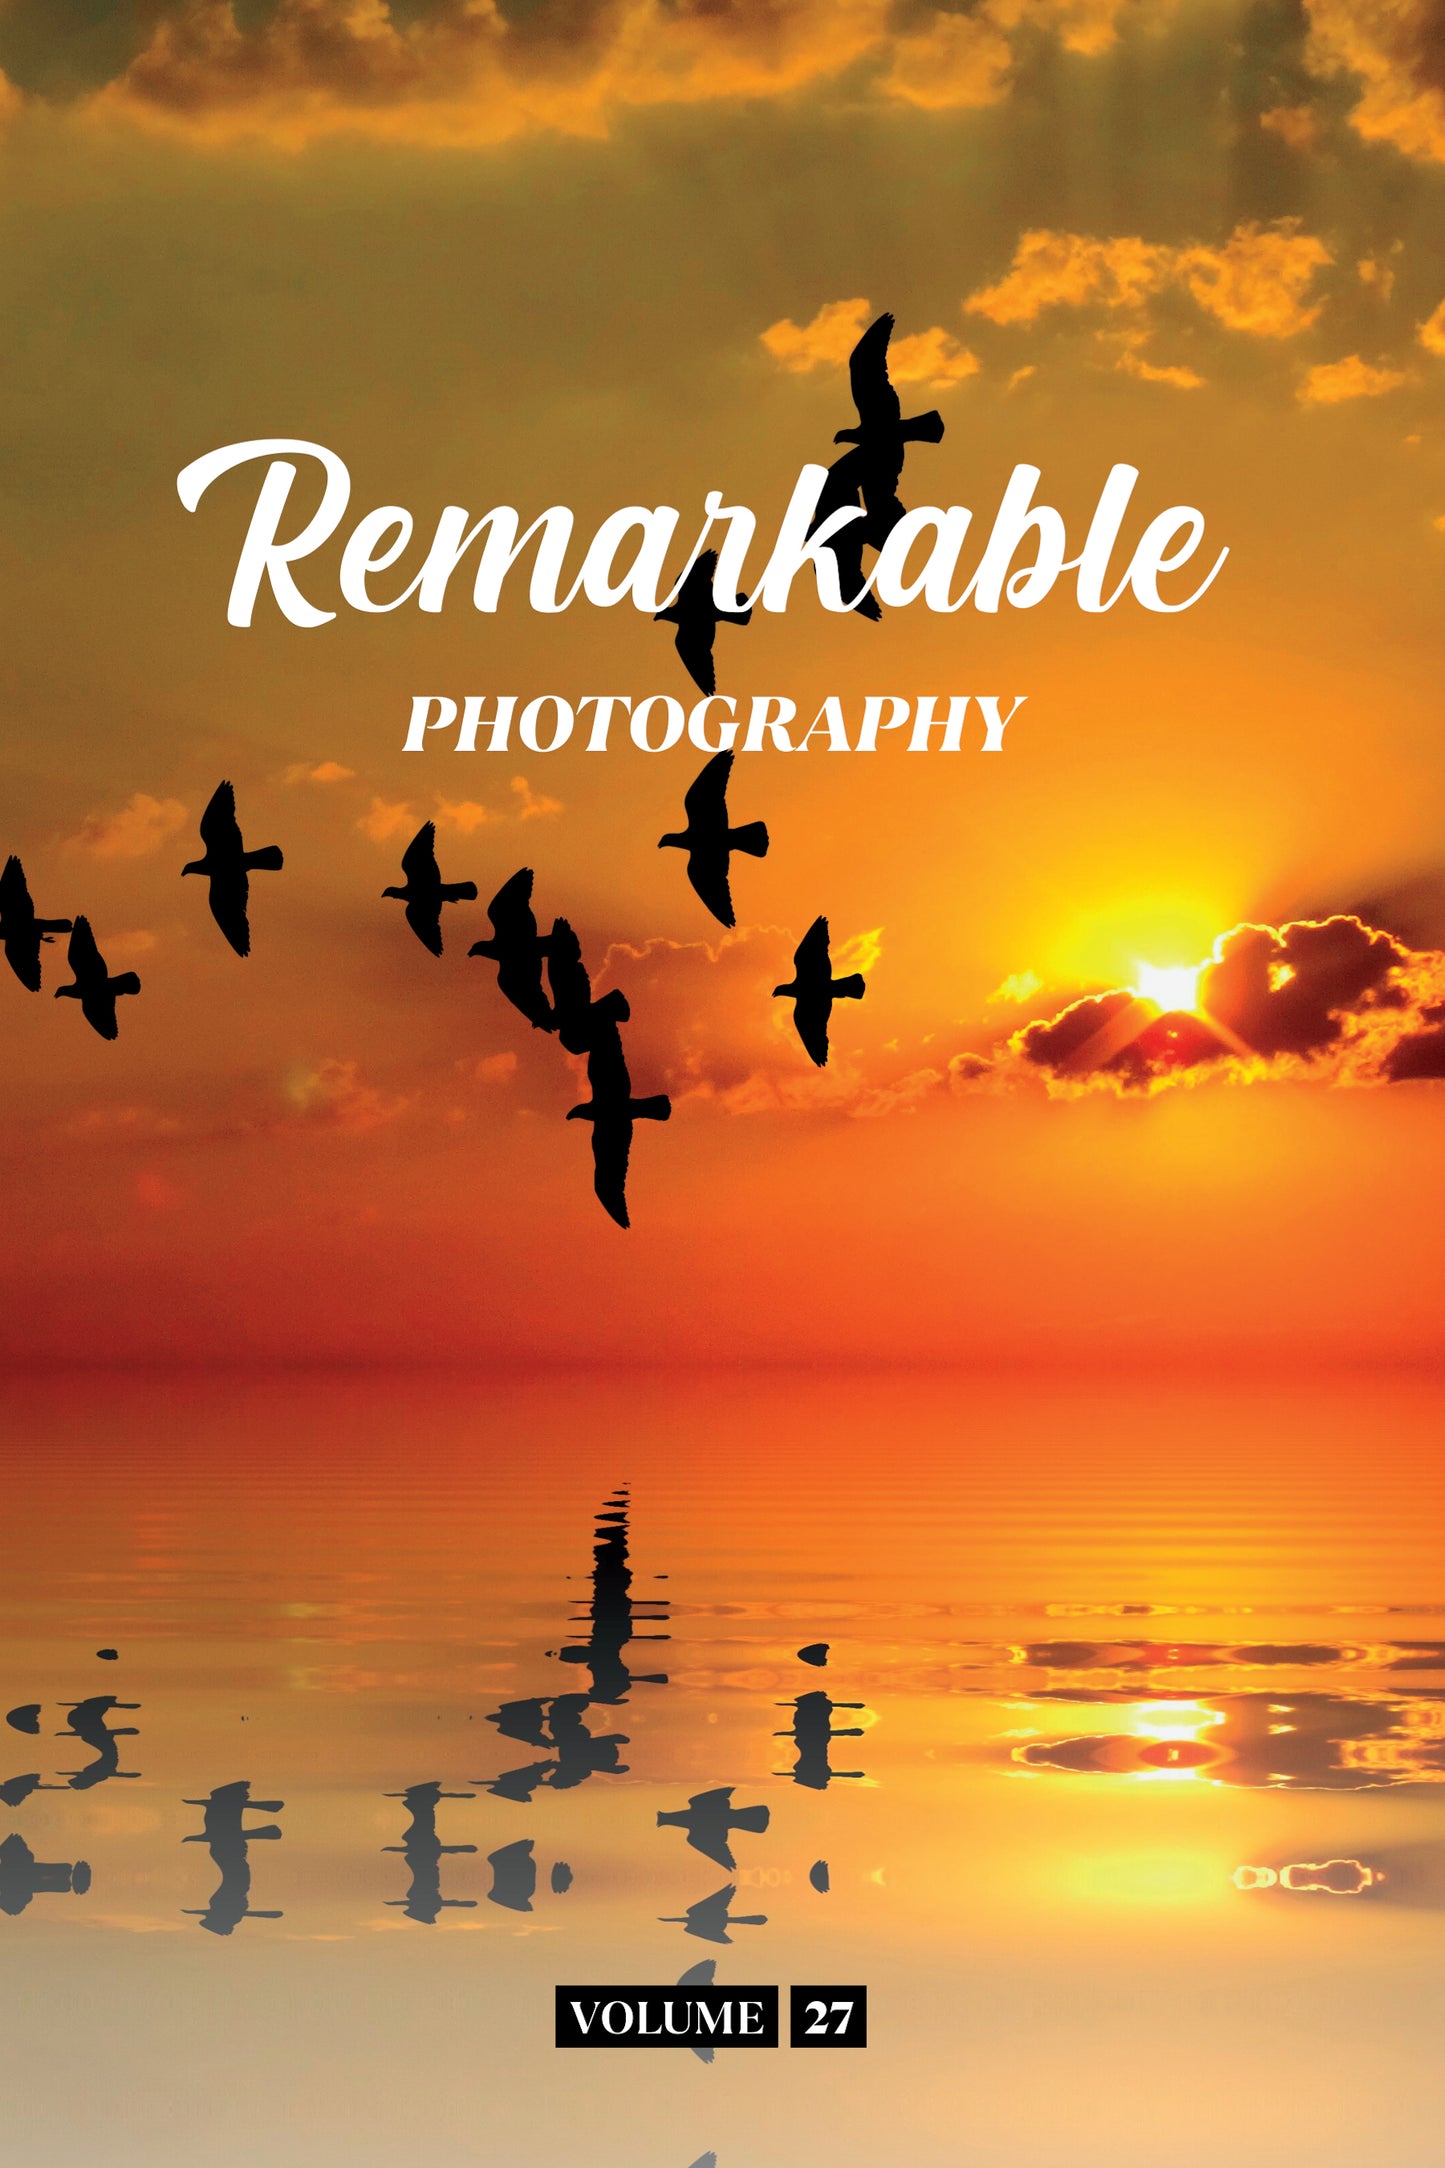 Remarkable Photography Volume 27 (Physical Book Pre-Order)